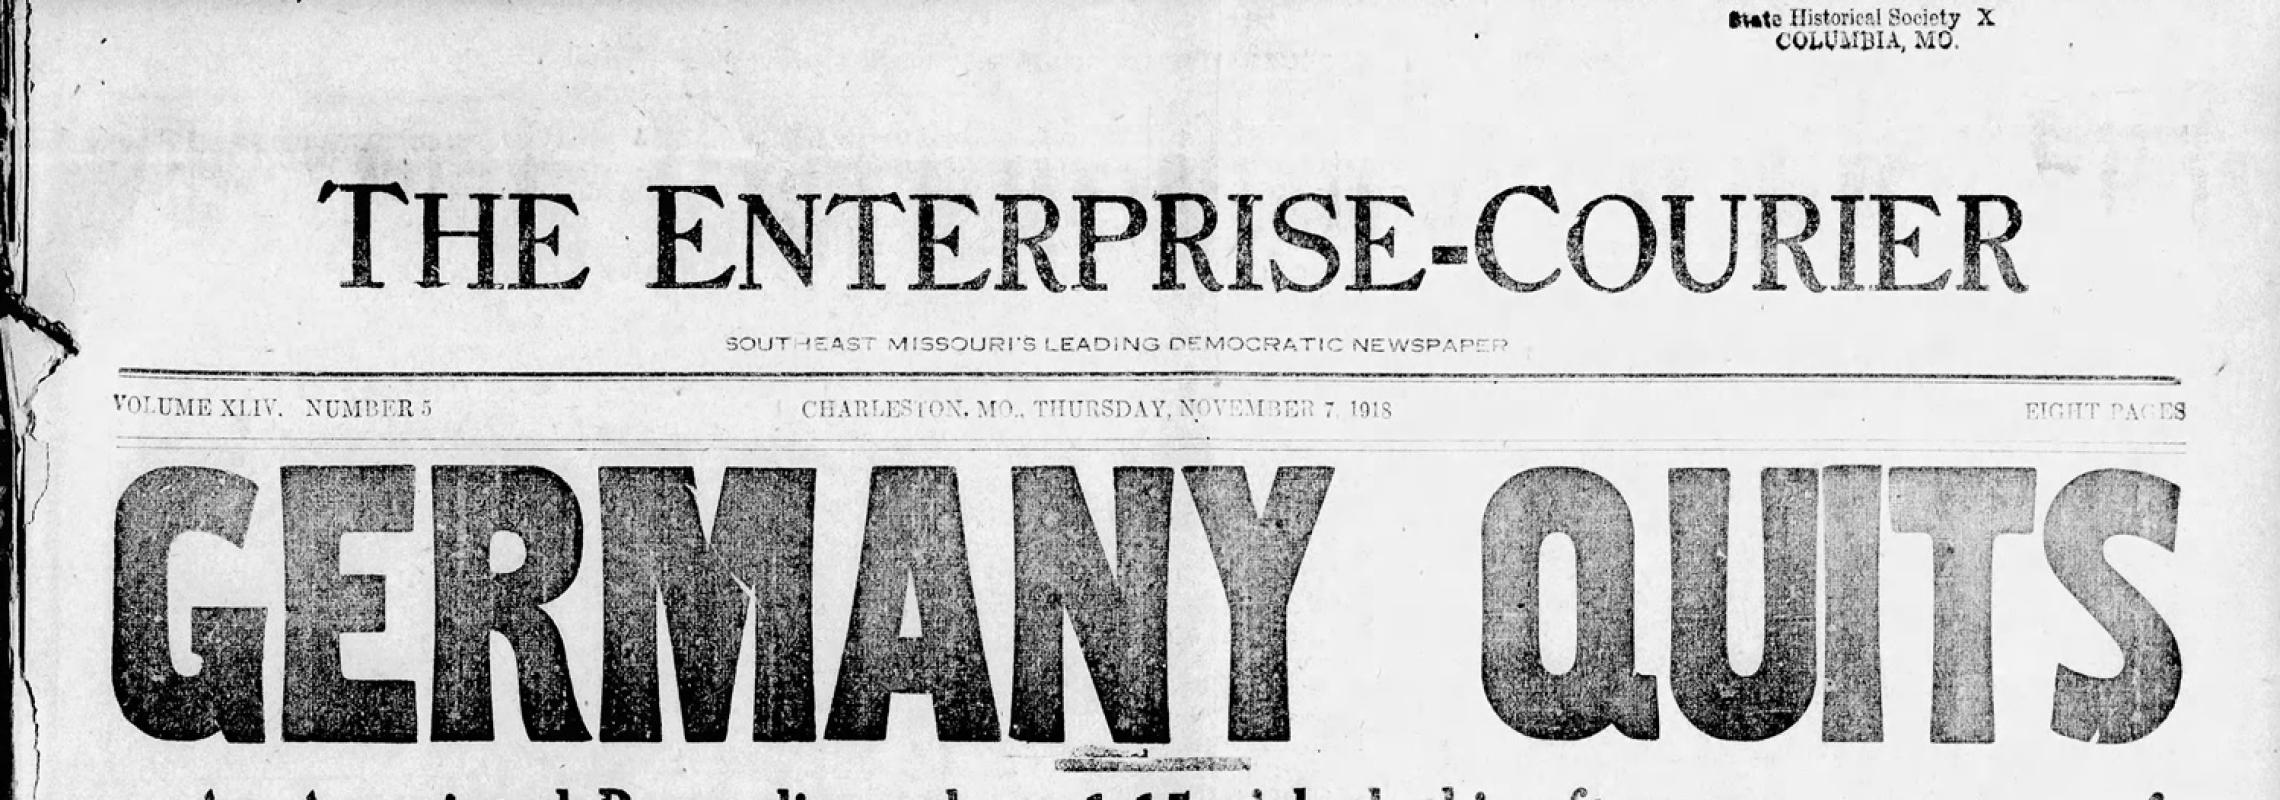 Enterprise-Courier front page from Nov. 7, 1918 with headline "Germany Quits"